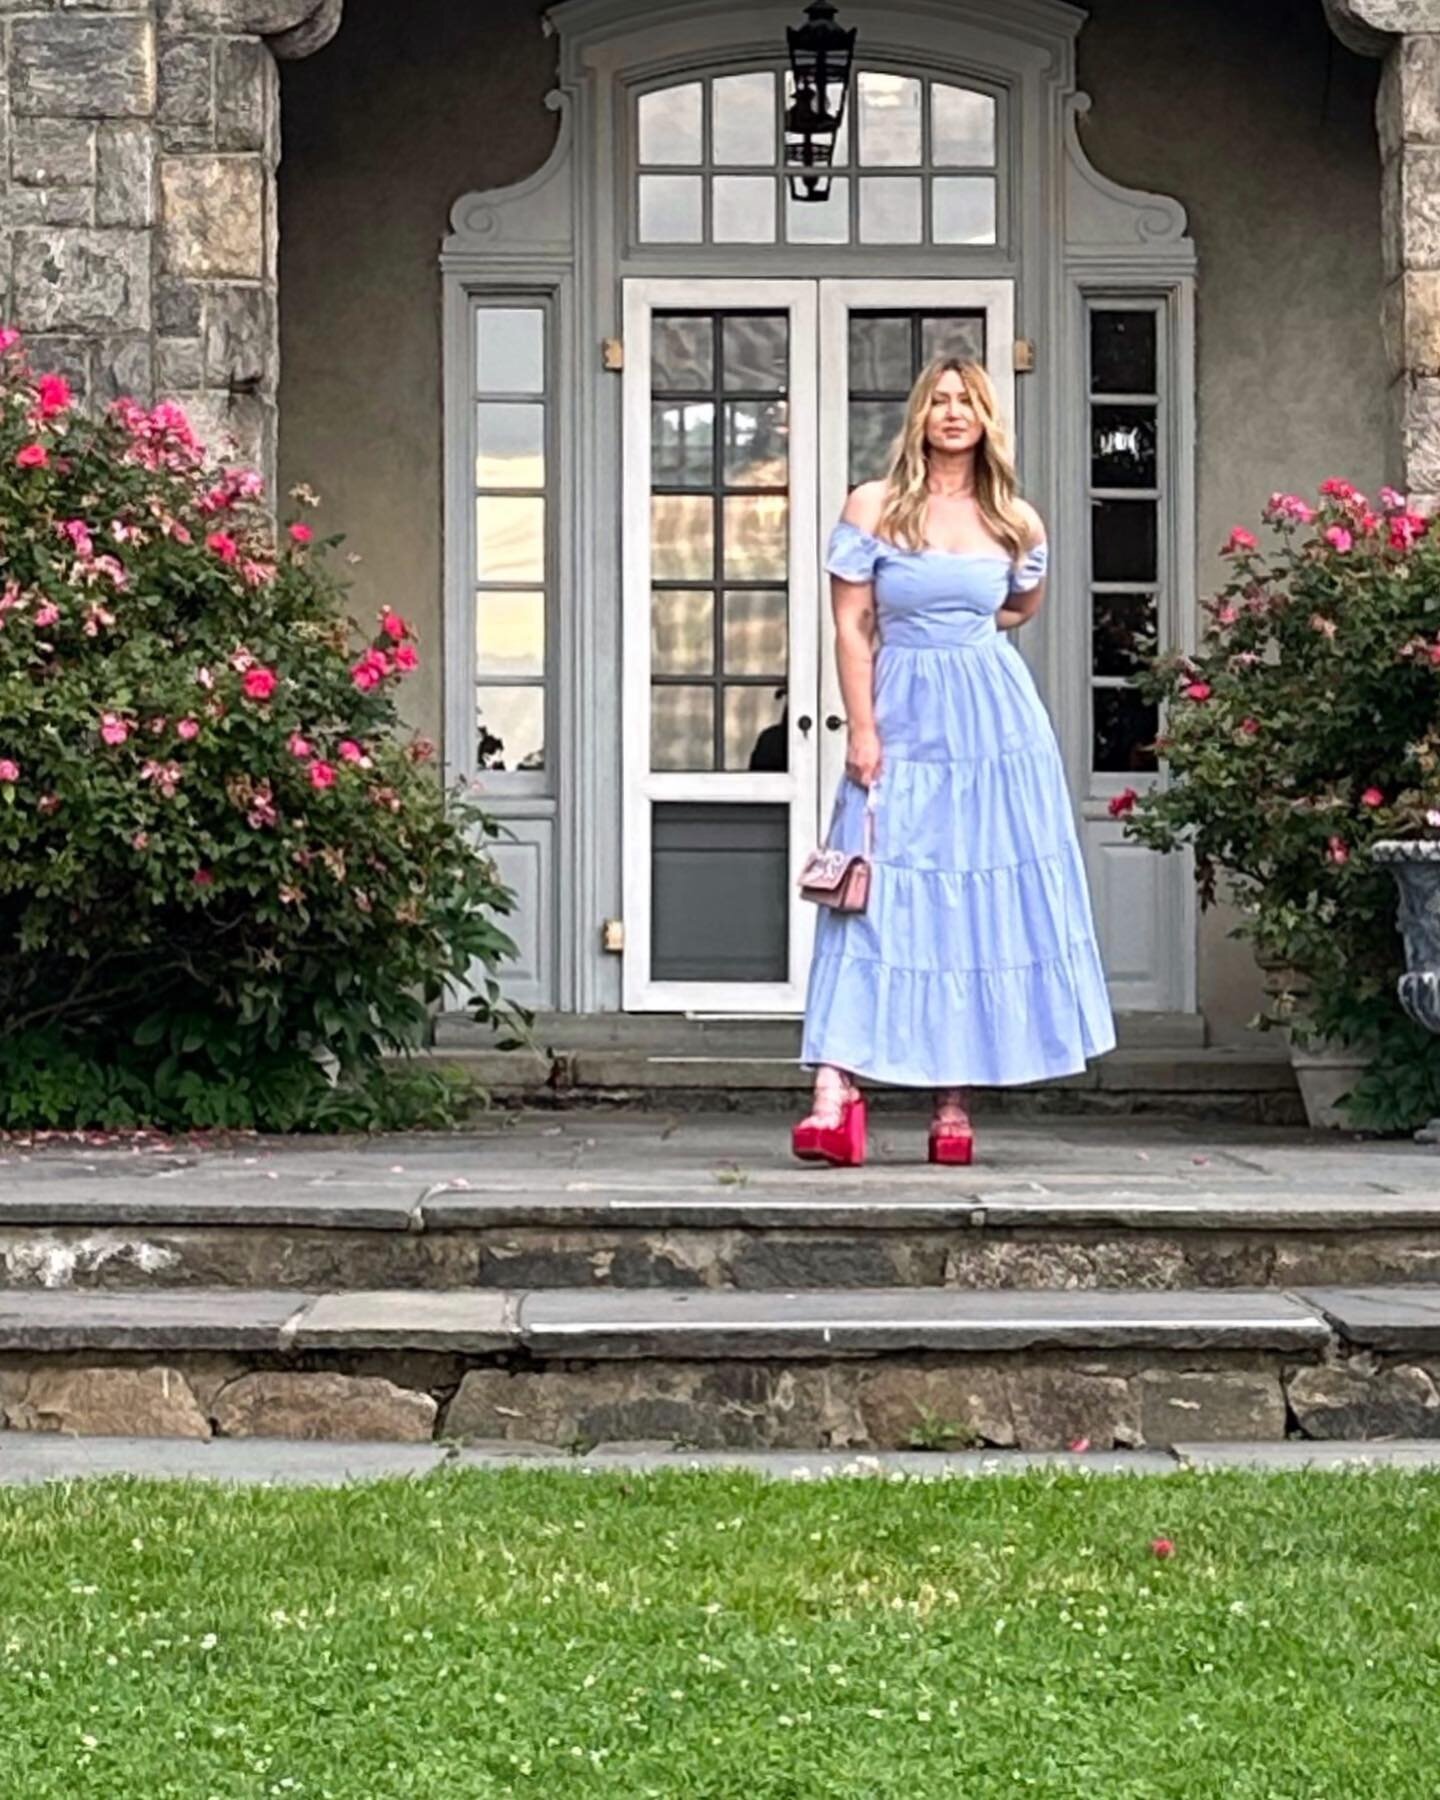 It&rsquo;s always an honor to be recognized as a Westchester Home Design Awards nominee! Thank you @westchesterhomemag for putting together another lovely event, and for providing amazing backdrops to show off ridiculous shoe choices.